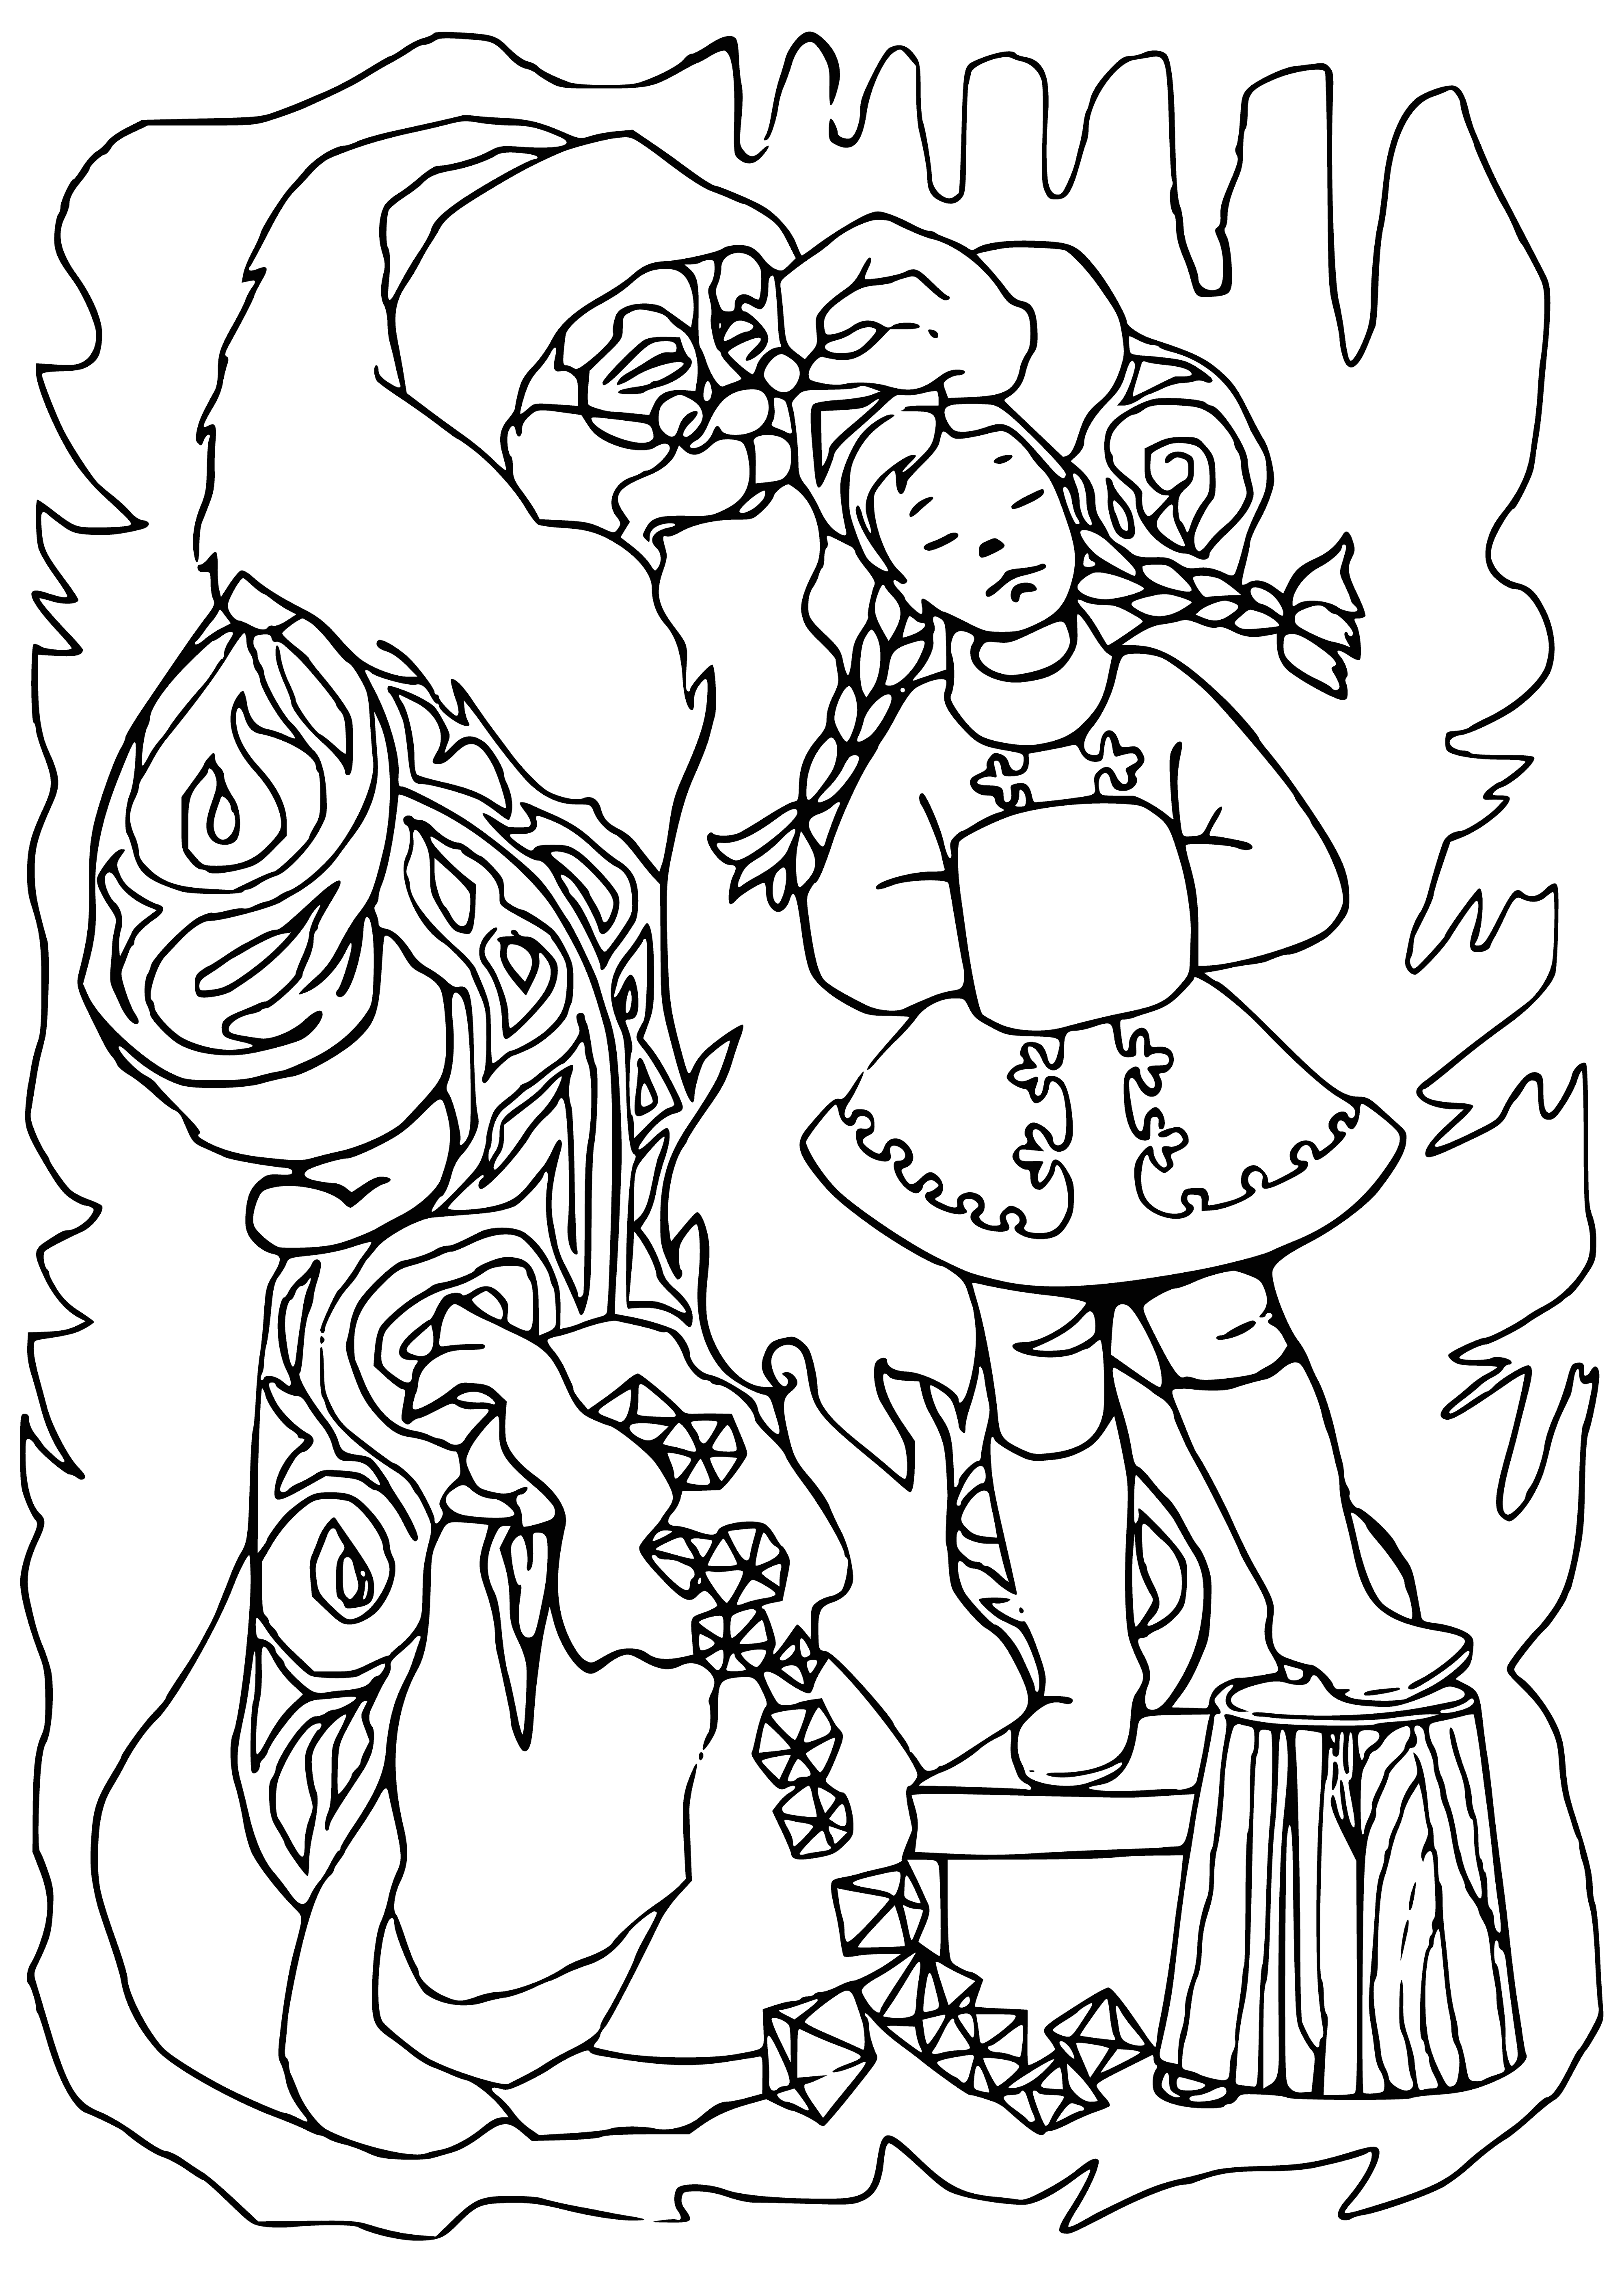 coloring page: An old woman and her daughter are in a coloring page - the woman standing with a staff, the daughter looking up. The daughter has a scarf on her head. #ColoringPage #MotherDaughter